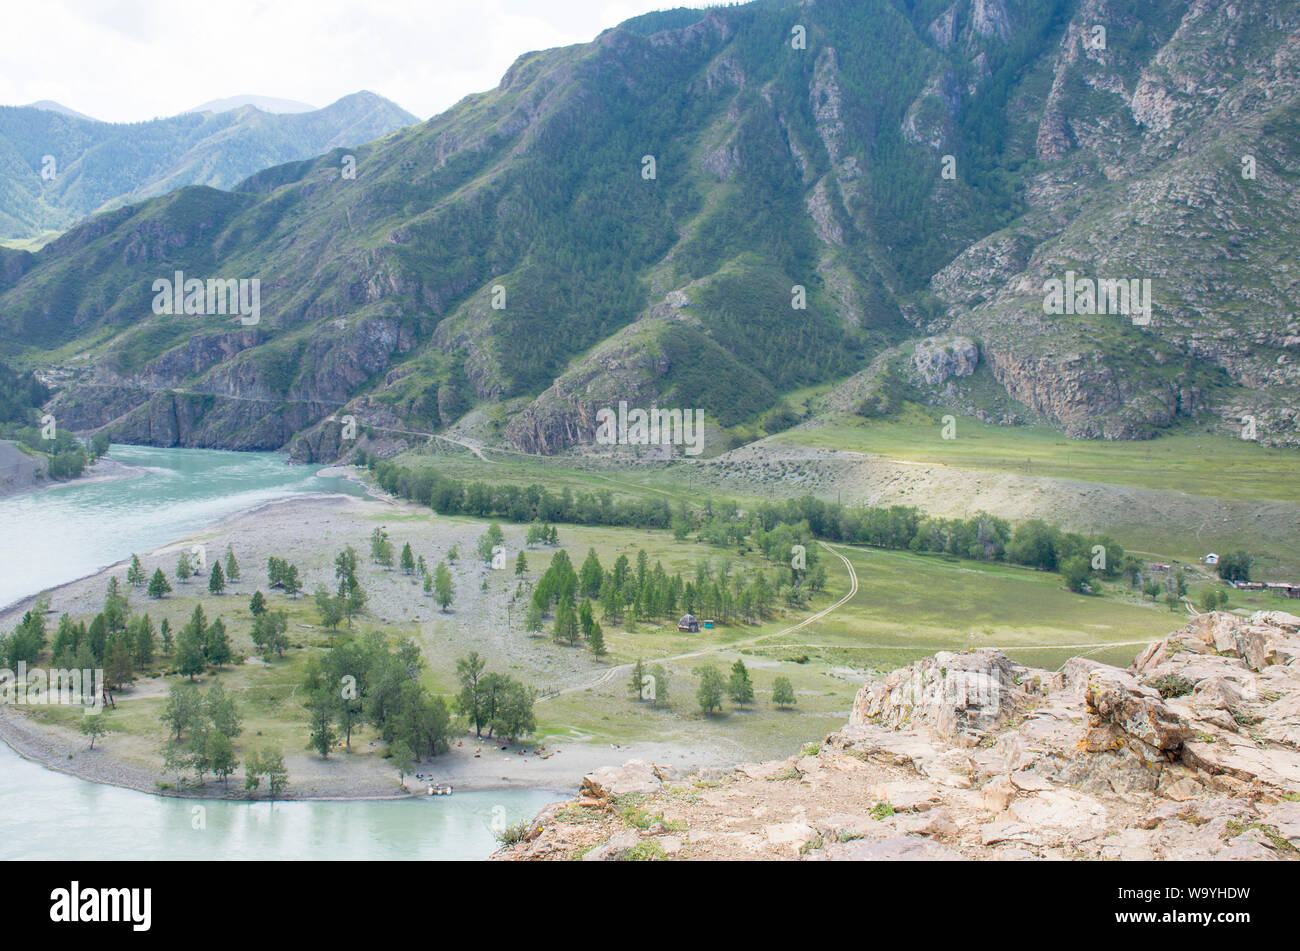 Landscape confluence of Chuya River and Katun River on Altai in Russia among mountains Stock Photo